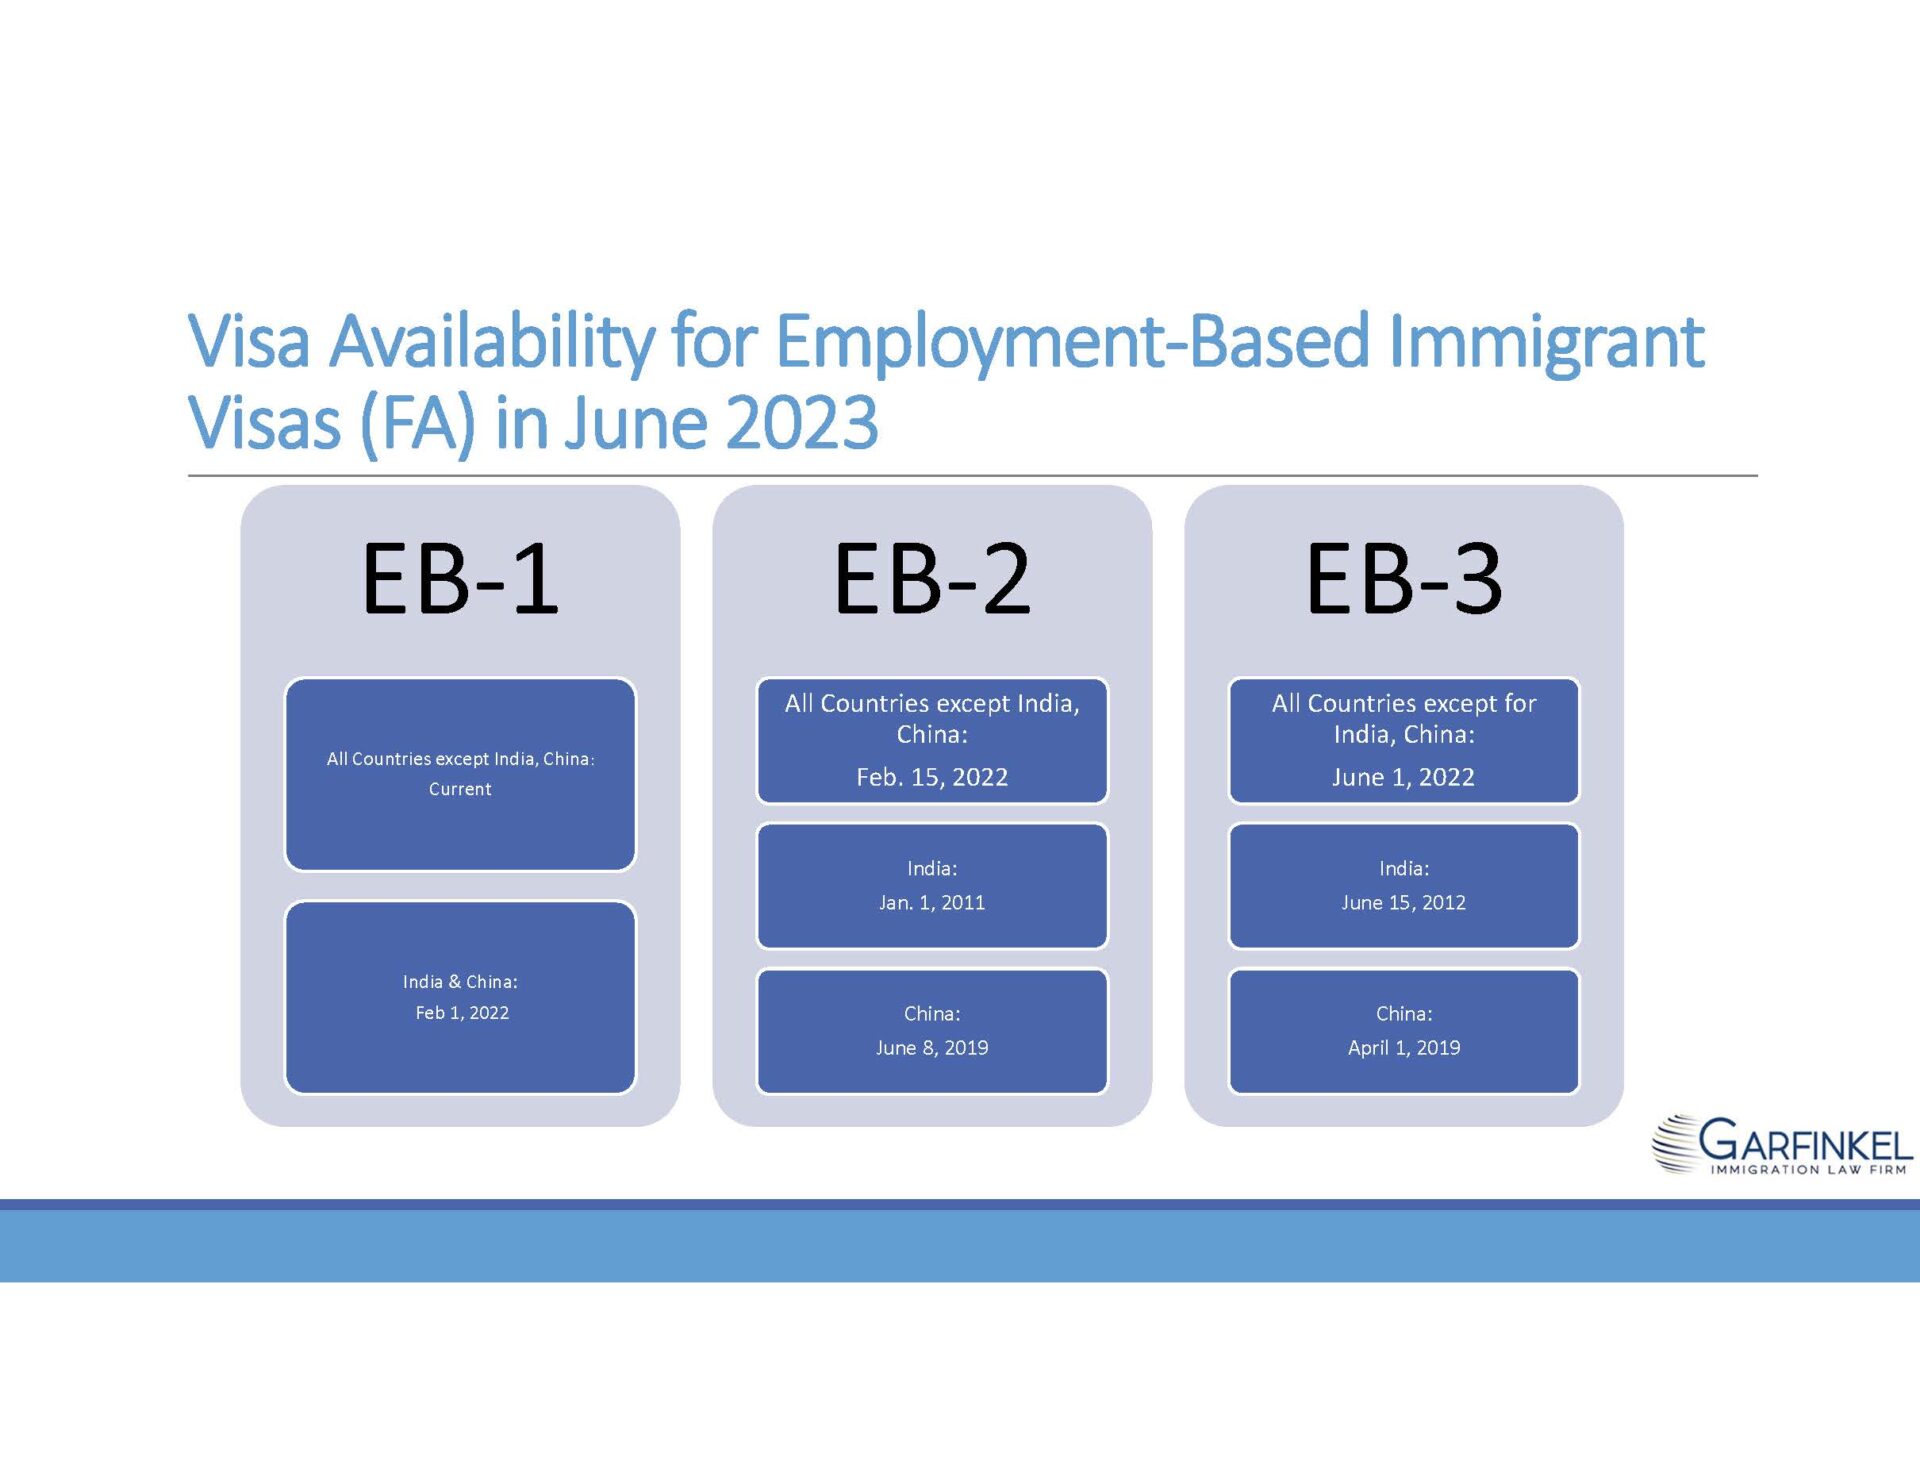 Visa Availability for Employment-Based Immigrant Visas (FA) in June 2023 EB-1: All Countries except India, China: Current. India & China: Feb 1, 2022 EB-2: All Countries except India, China: Feb. 15, 2022. India: Jan. 1, 2011. China: June 8, 2019. EB-3: All Countries except for India, China: June 1, 2022. India: June 15, 2012. China: April 1, 2019. 